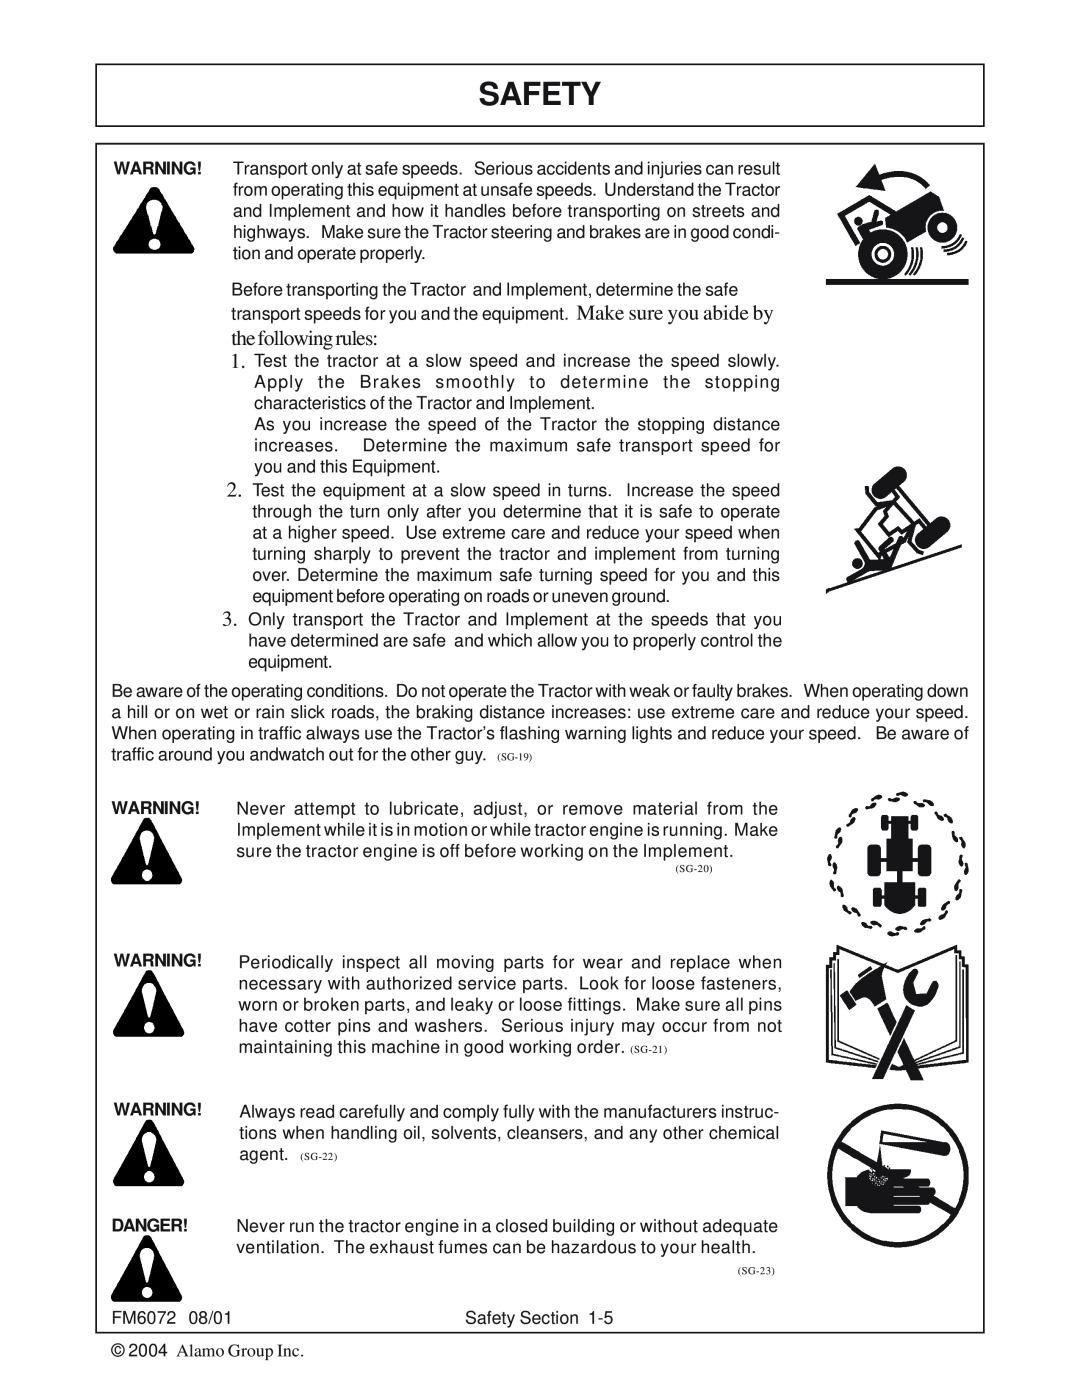 Servis-Rhino FM60/72 manual Safety, the following rules, Danger, SG-20, SG-23 